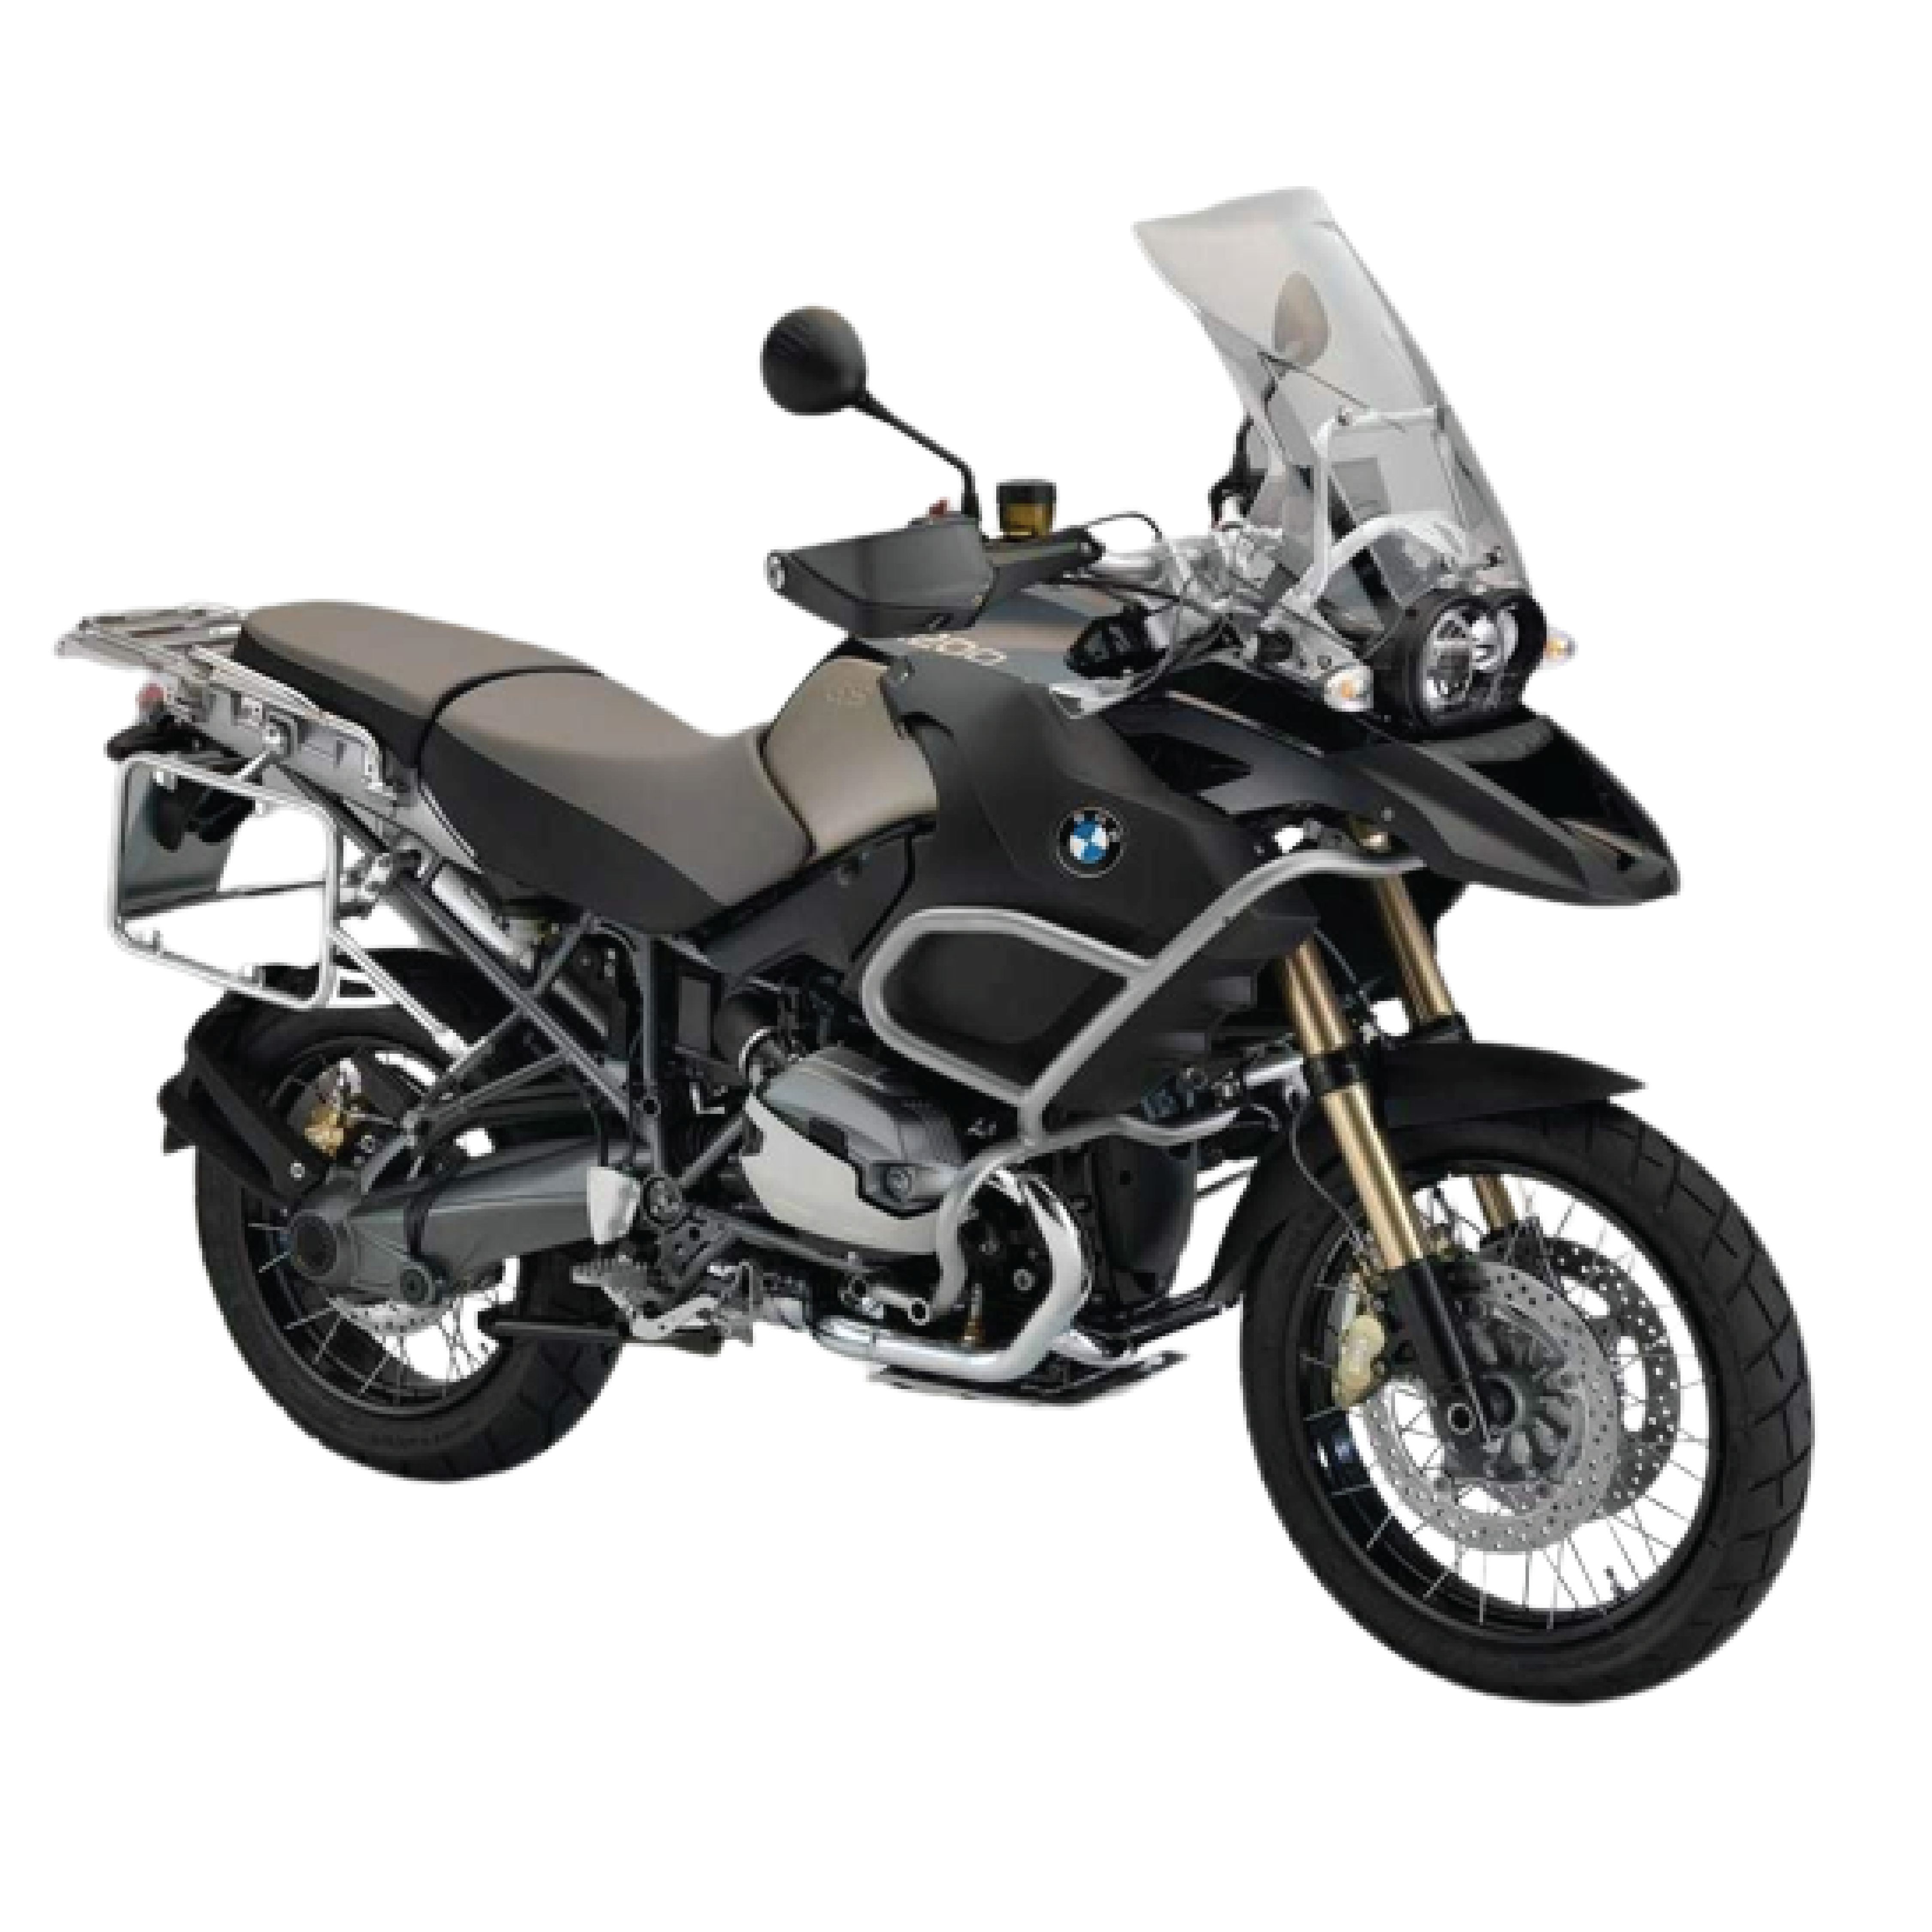 BMW R 1200 GS ADVENTURE (OIL COOLED)